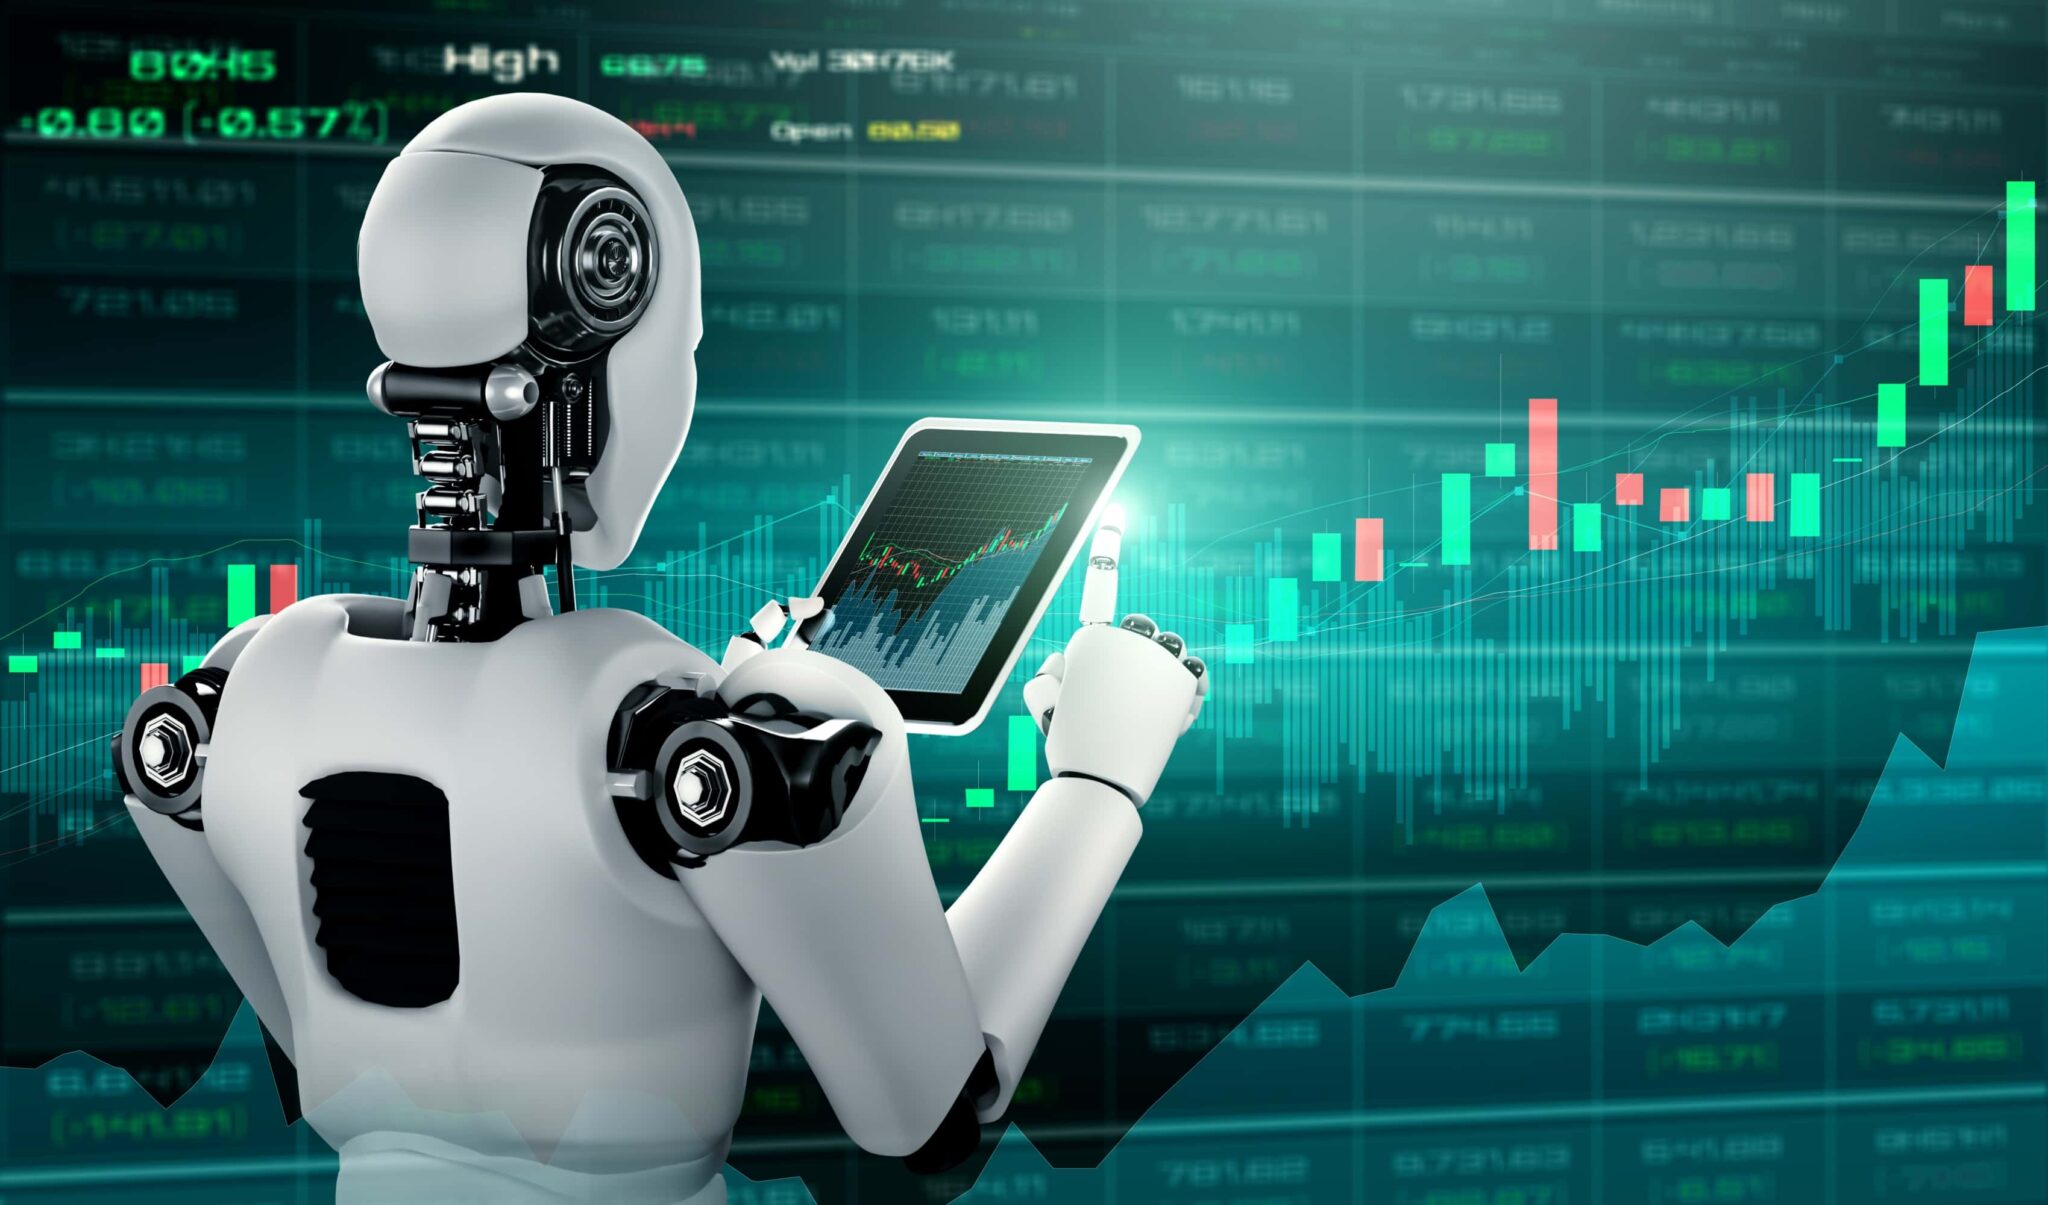 Reviews of forex robots what role does an underwriter play in the ipo process